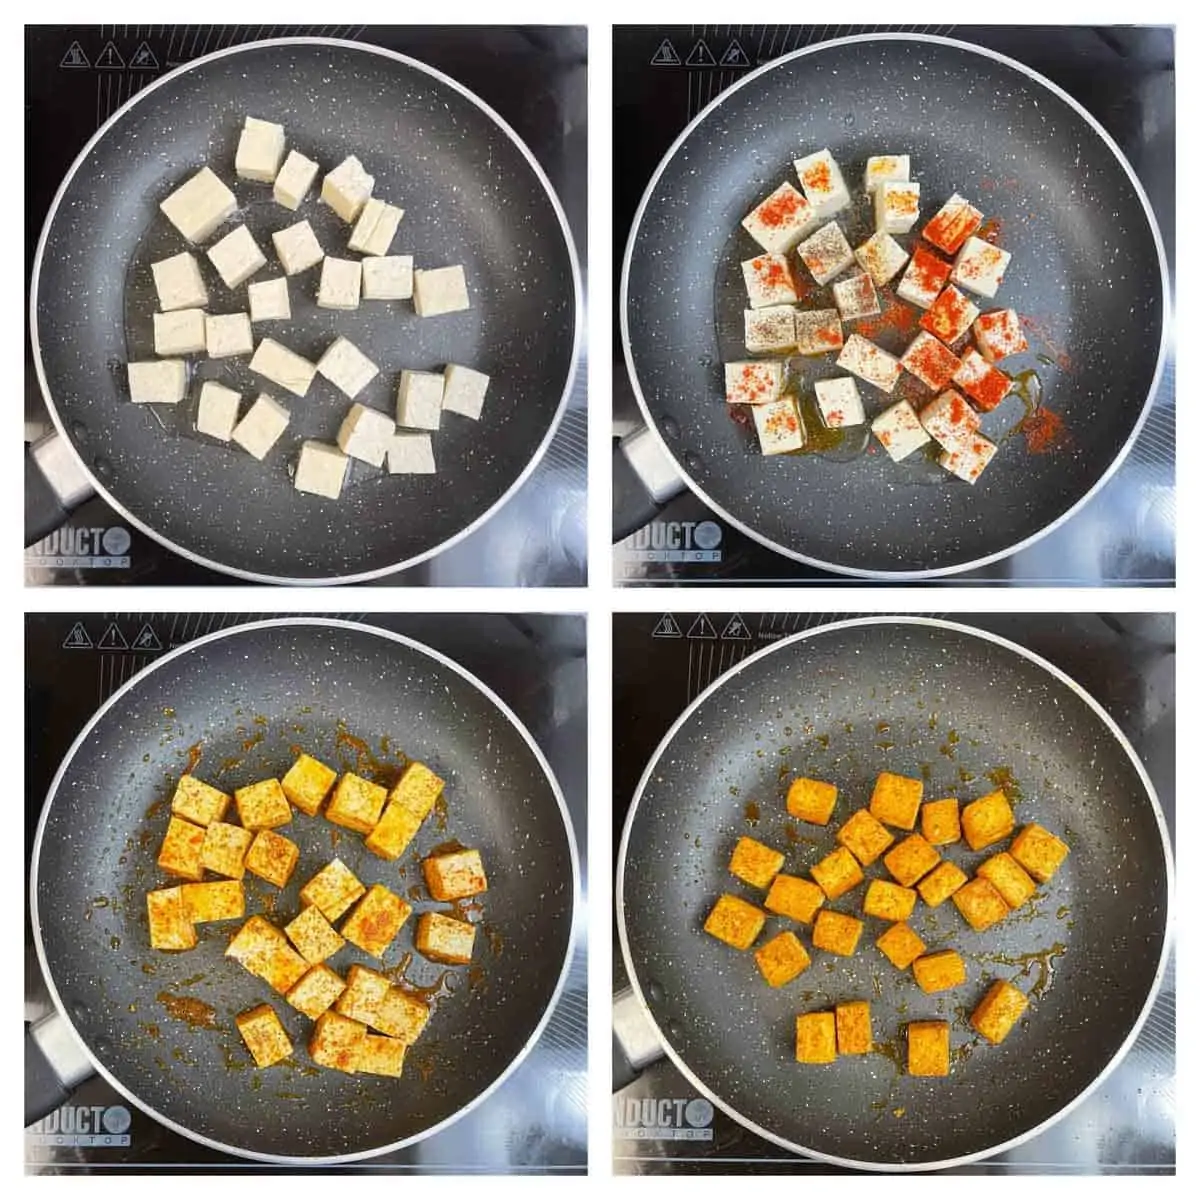 step to shallow fry tofu with some spices till crisp collage